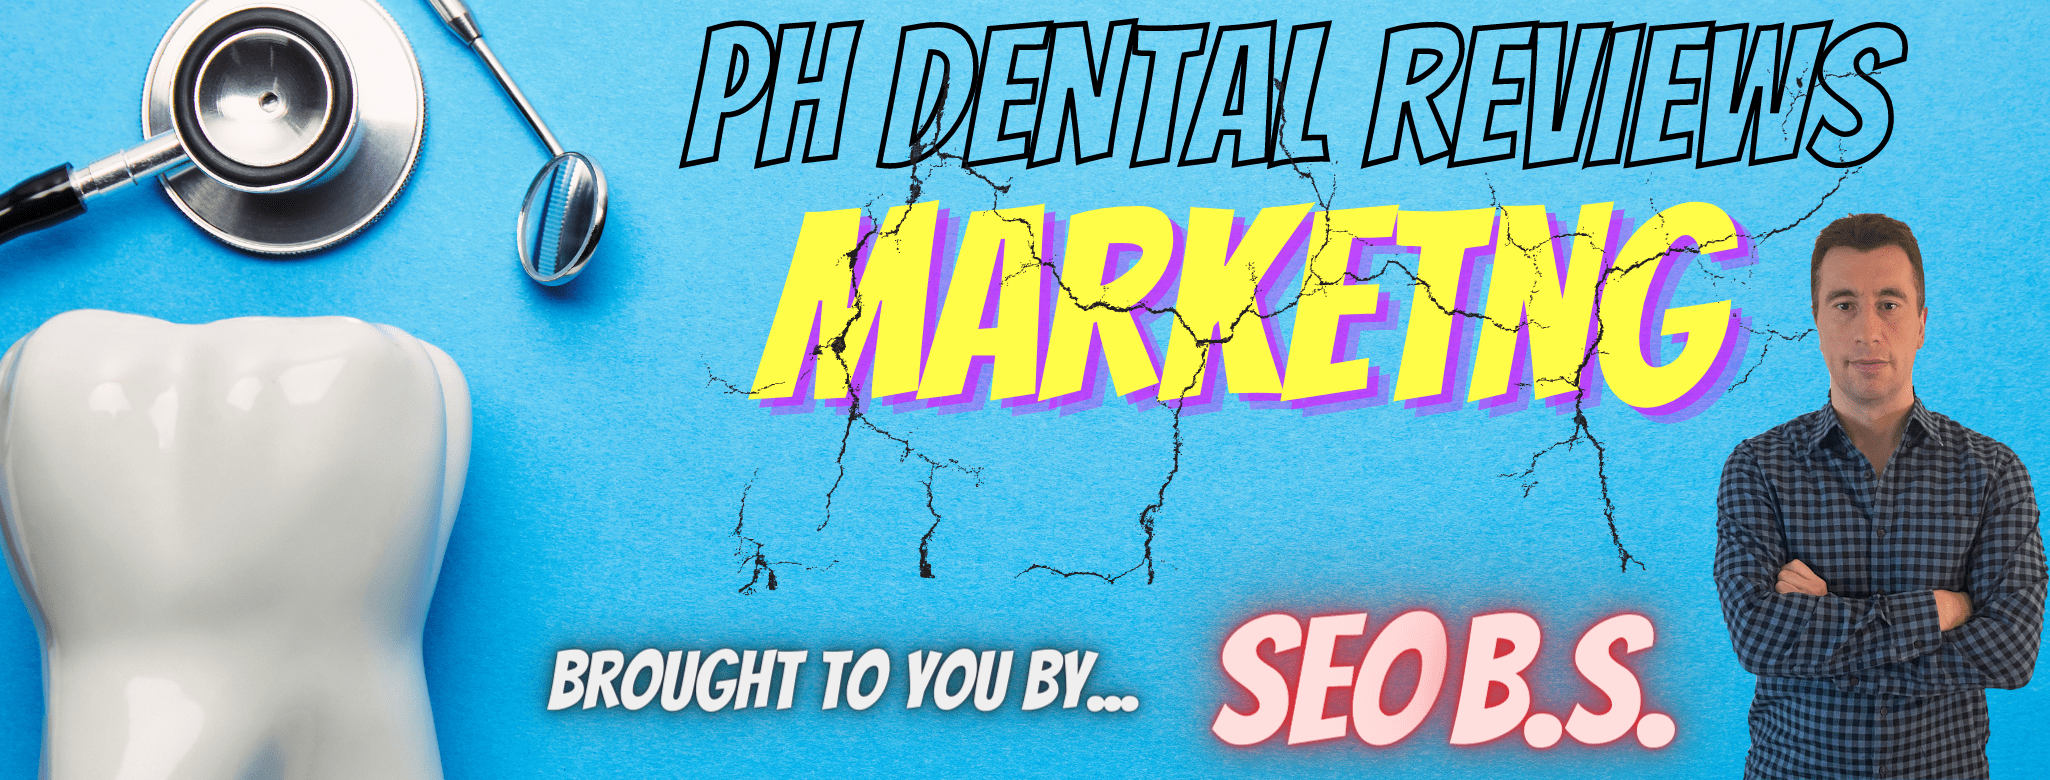 picture of dental reviews marketing banner 